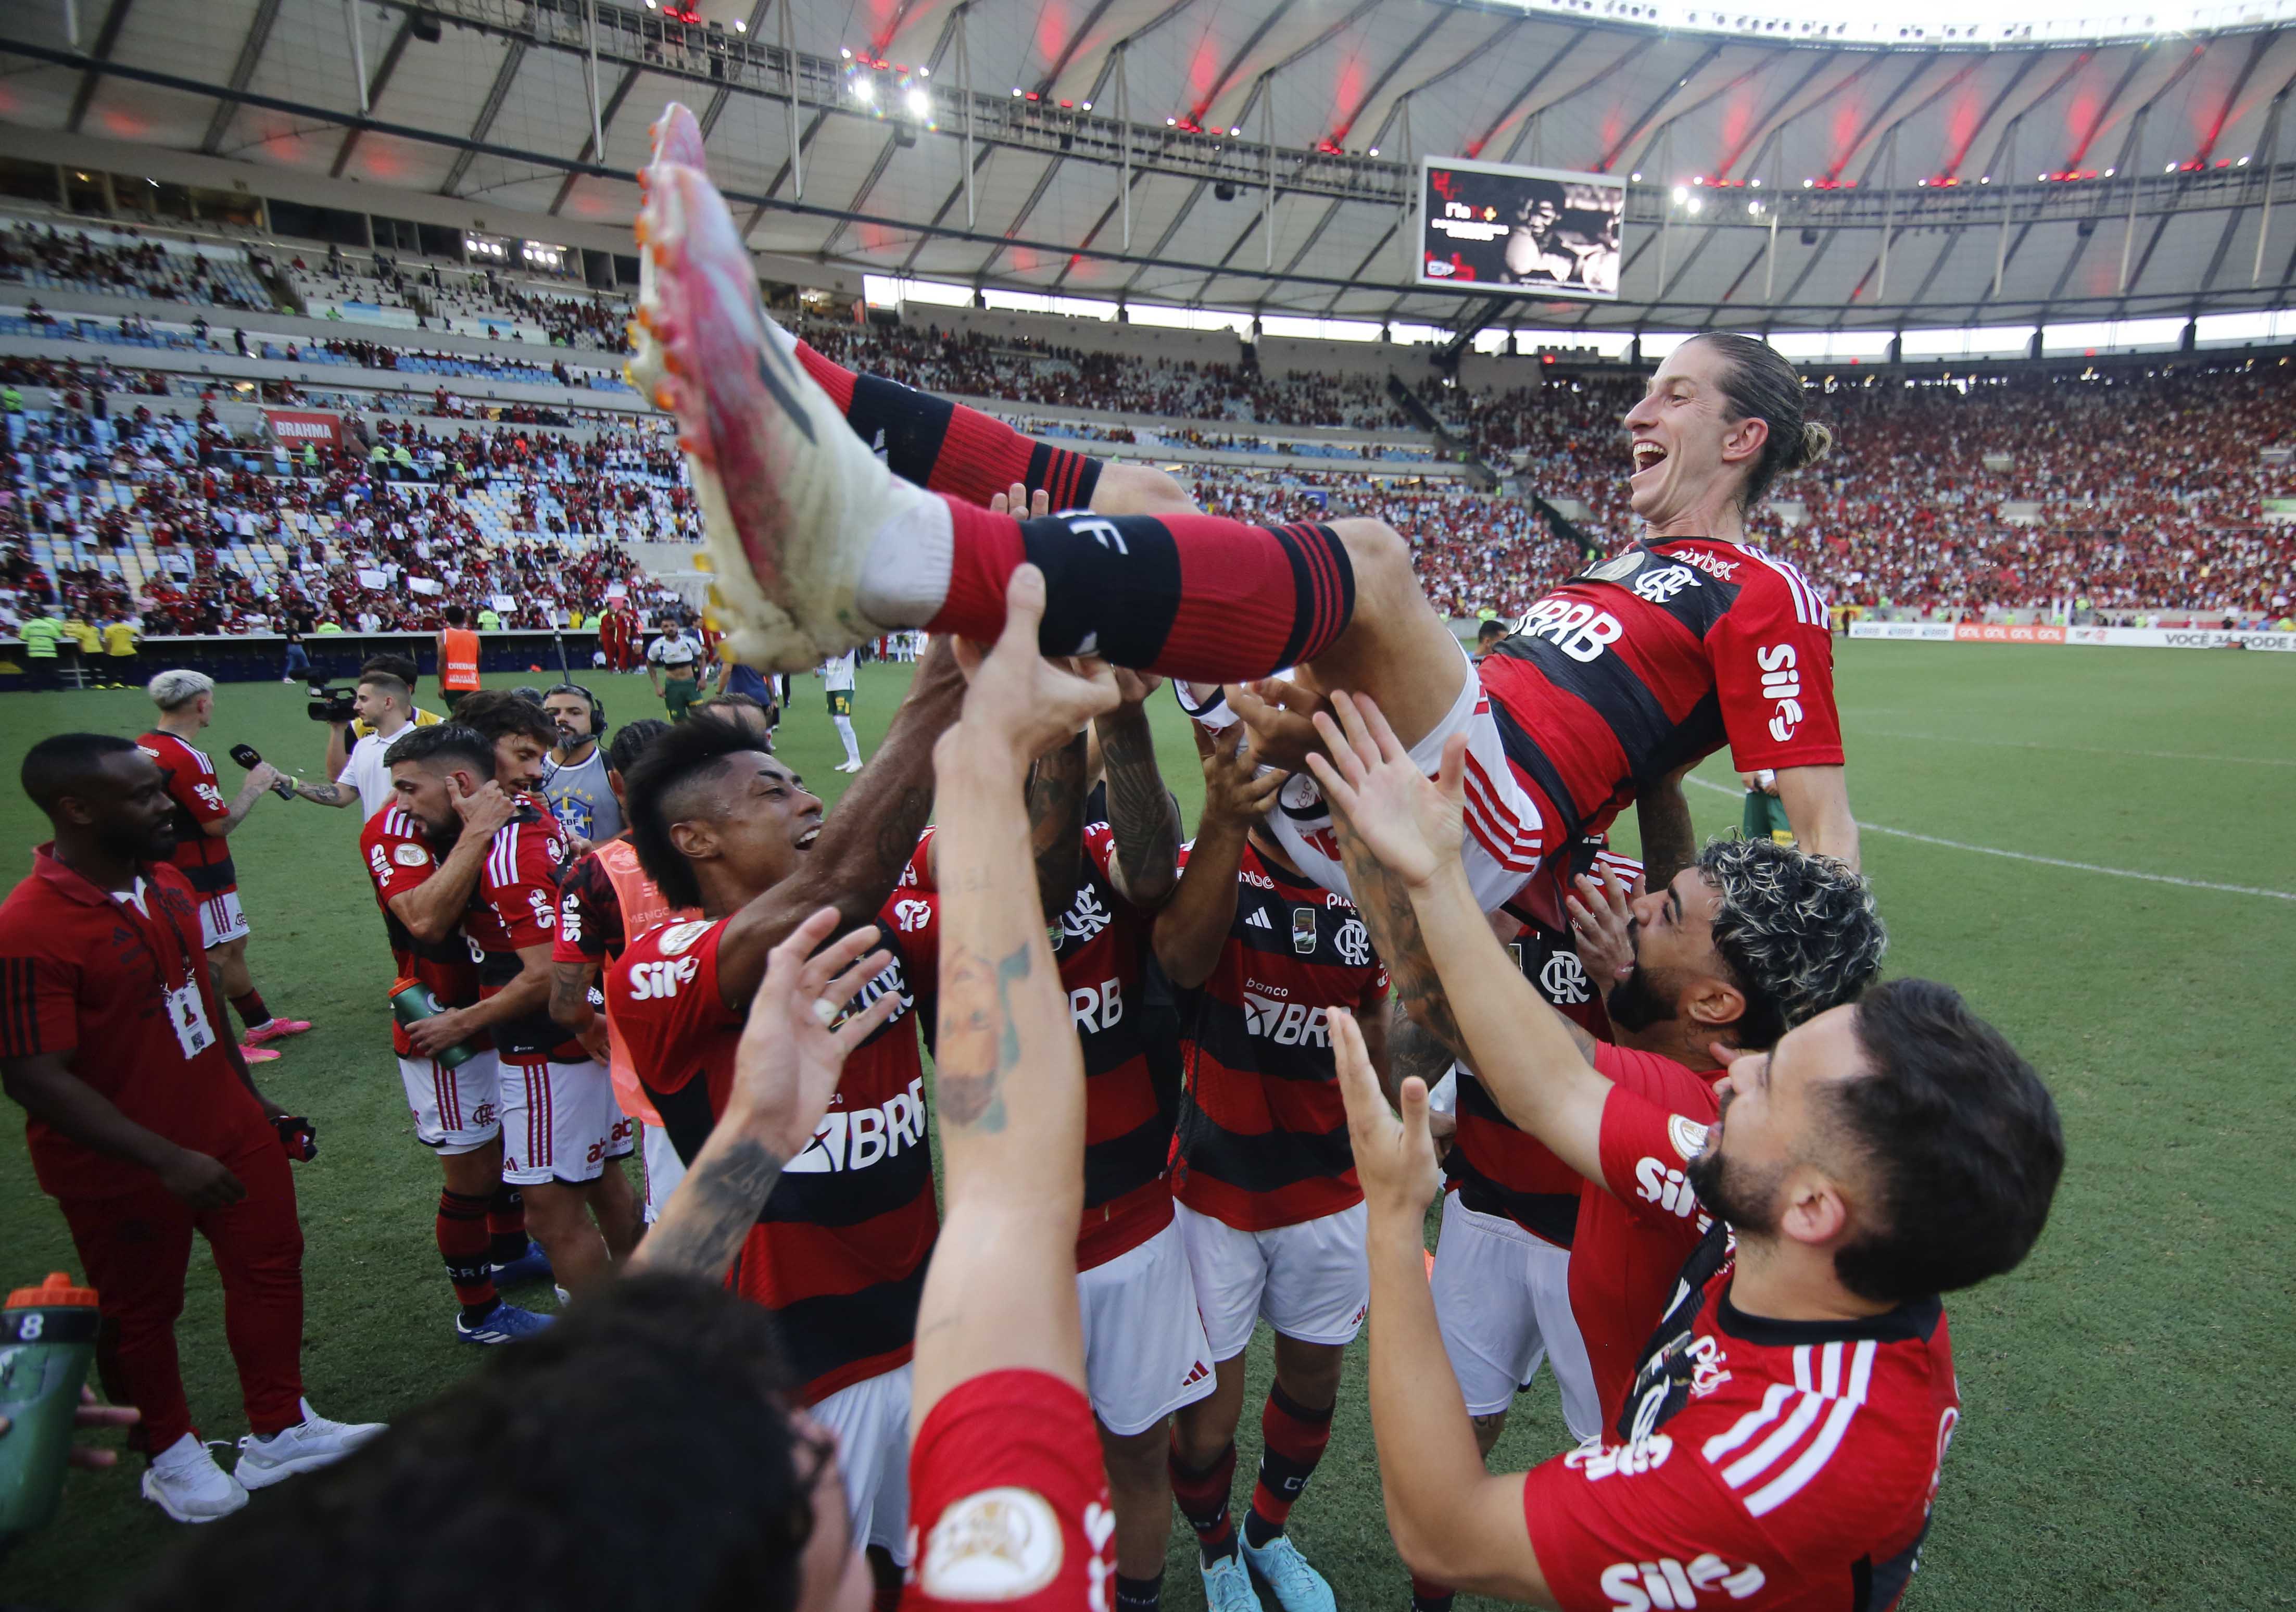 De La Cruz will be the 10th Uruguayan for Flamengo; see the list with  Arrascaeta on top 